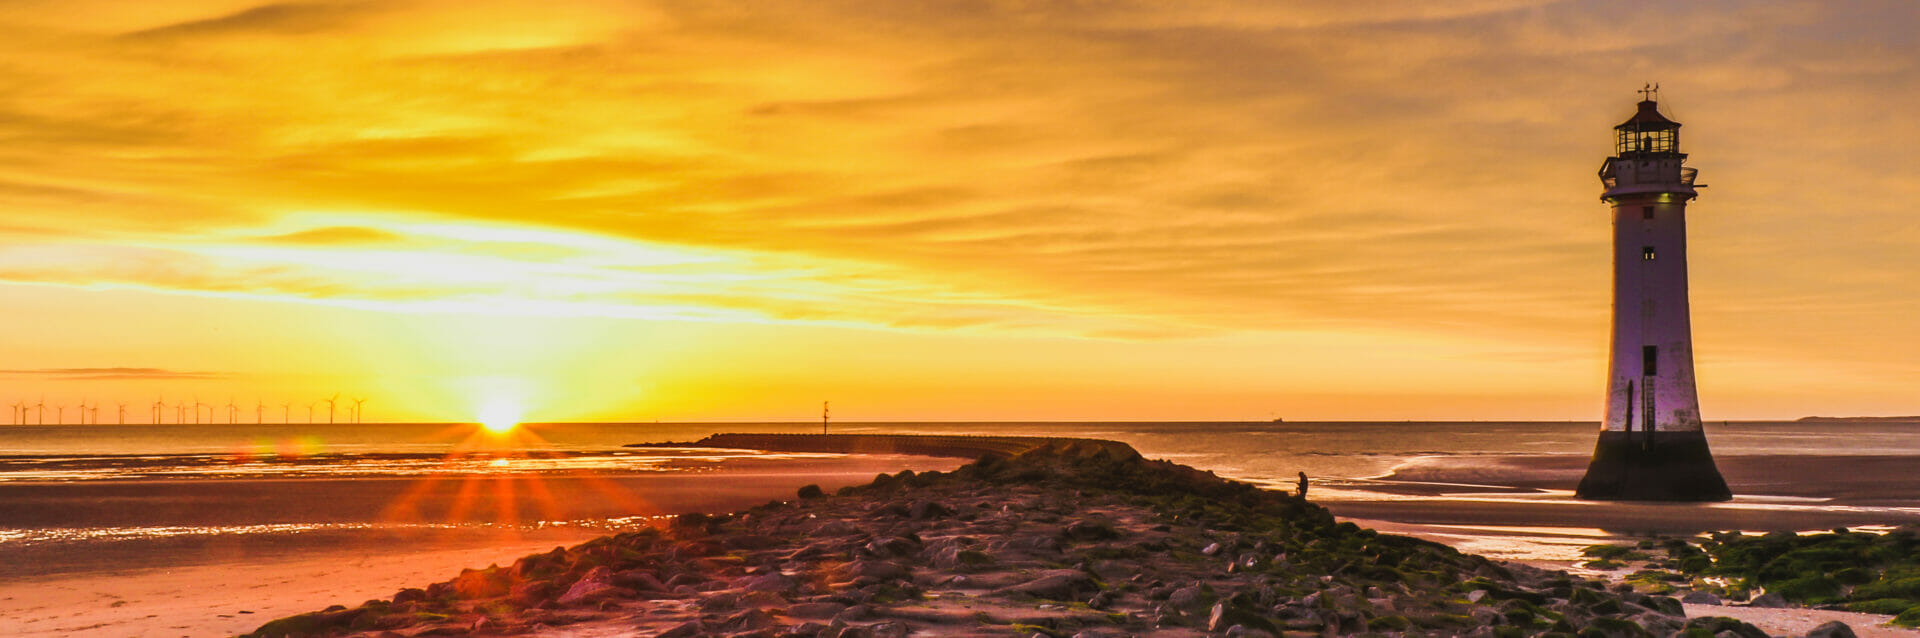 Lighthouses, Skylines, Photography and Fish n Chips  - Photo of Perch Rock Lighthouse in New Brighton with the sun setting behind